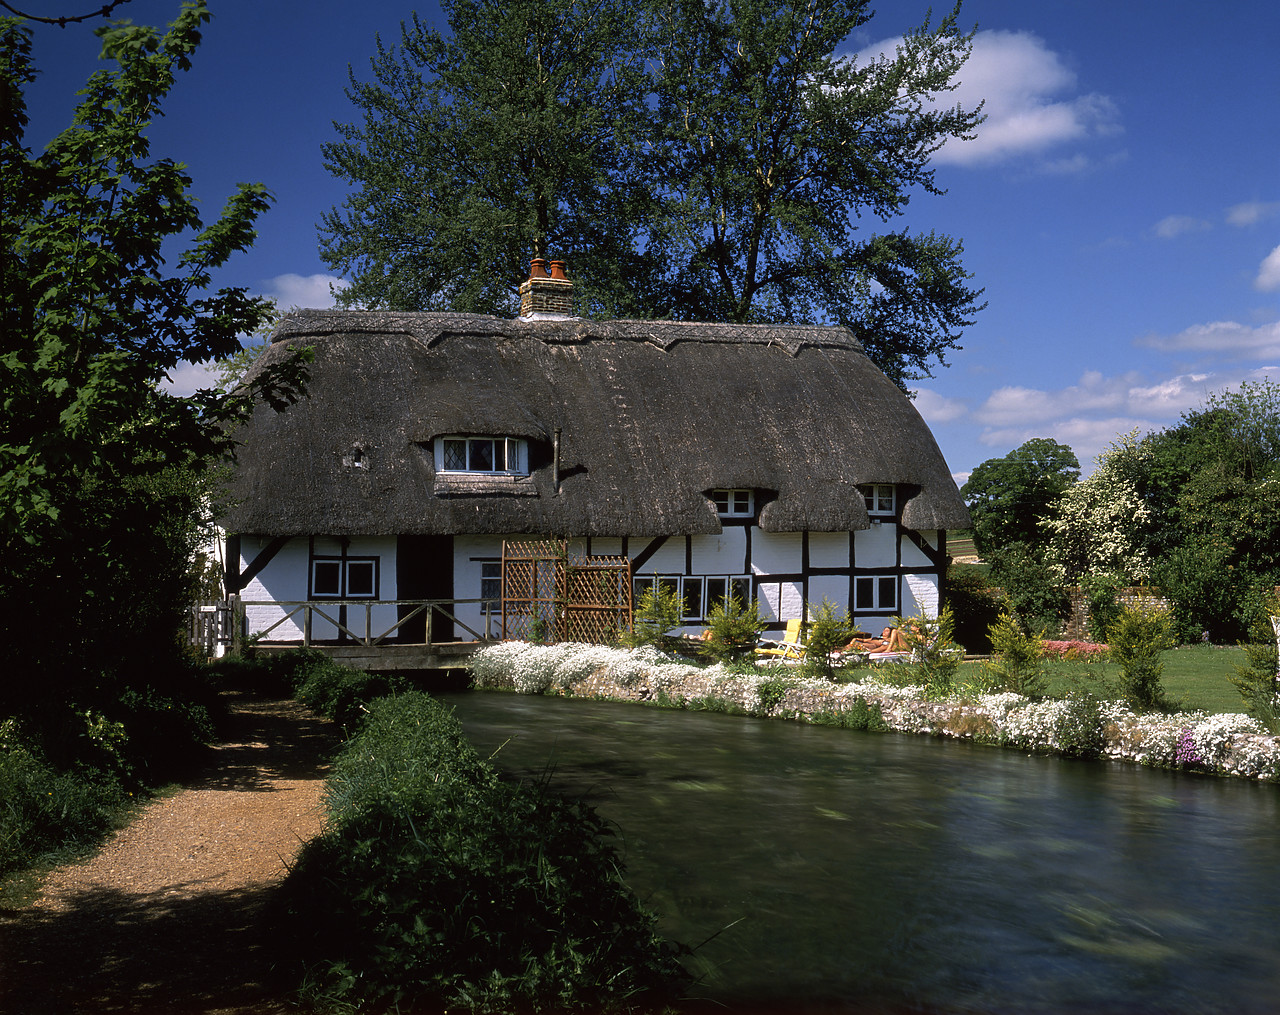 #902878-1 - The Fulling Mill Cottage, New Alresford, Hampshire, England